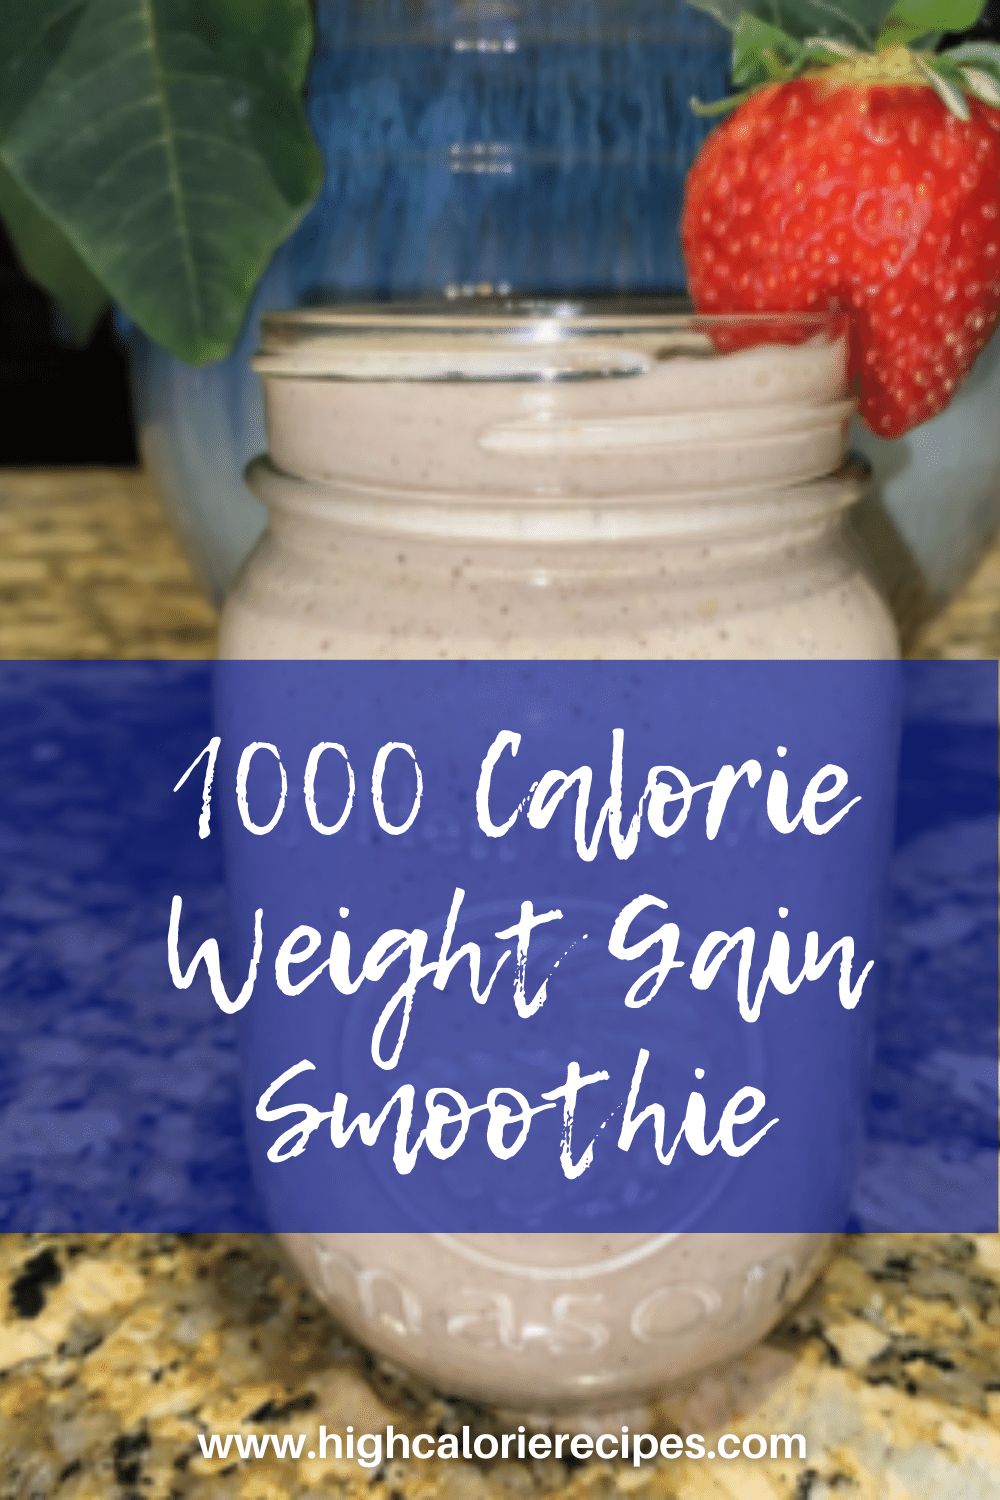 1000 Calorie Smoothie for Weight Gain - High Calorie Recipes